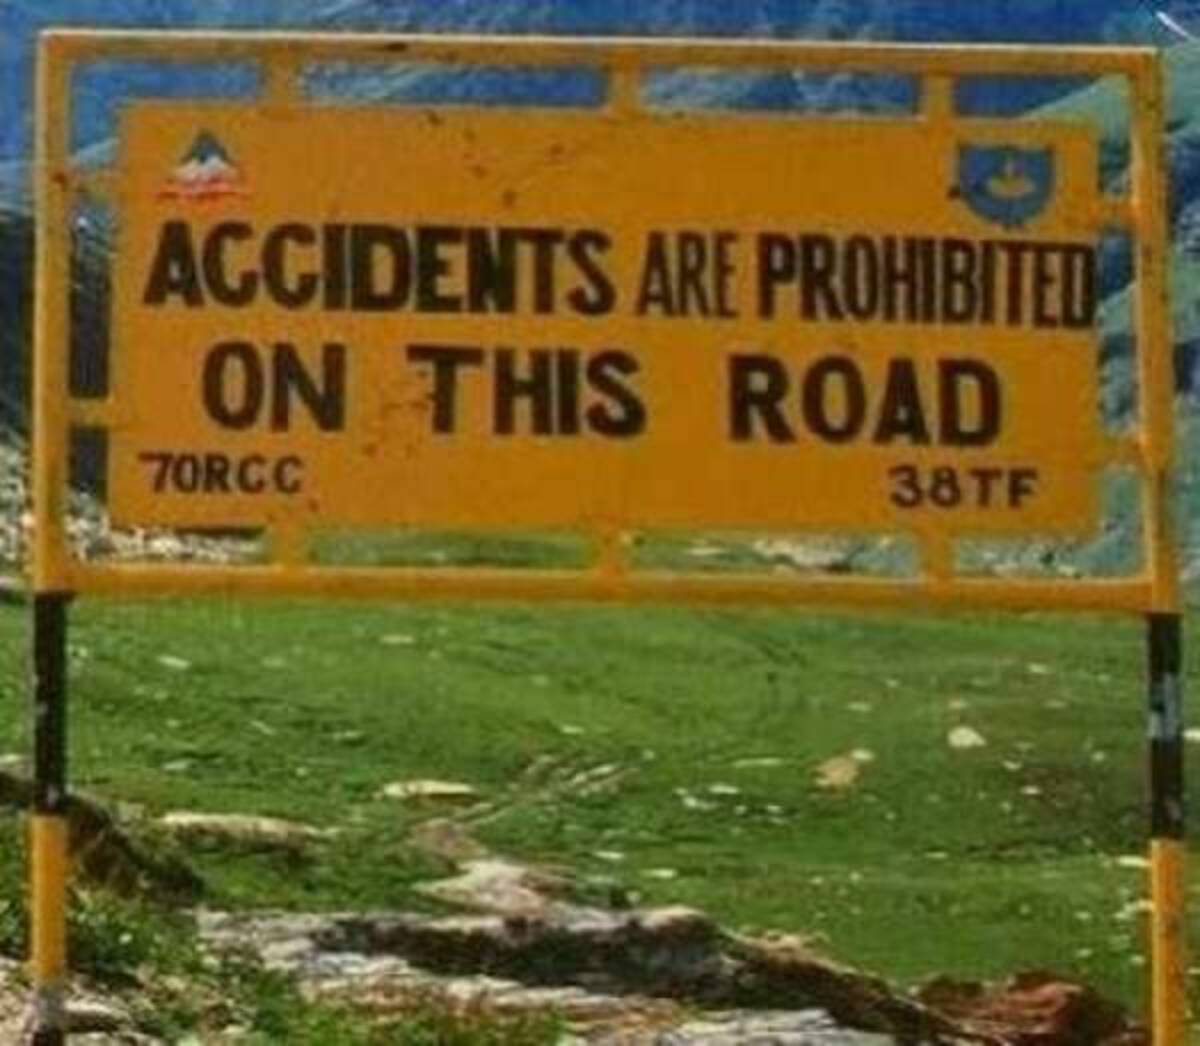 funny road signs clean - 2 Accidents Are Prohibited On This Road 70RCC 38TF